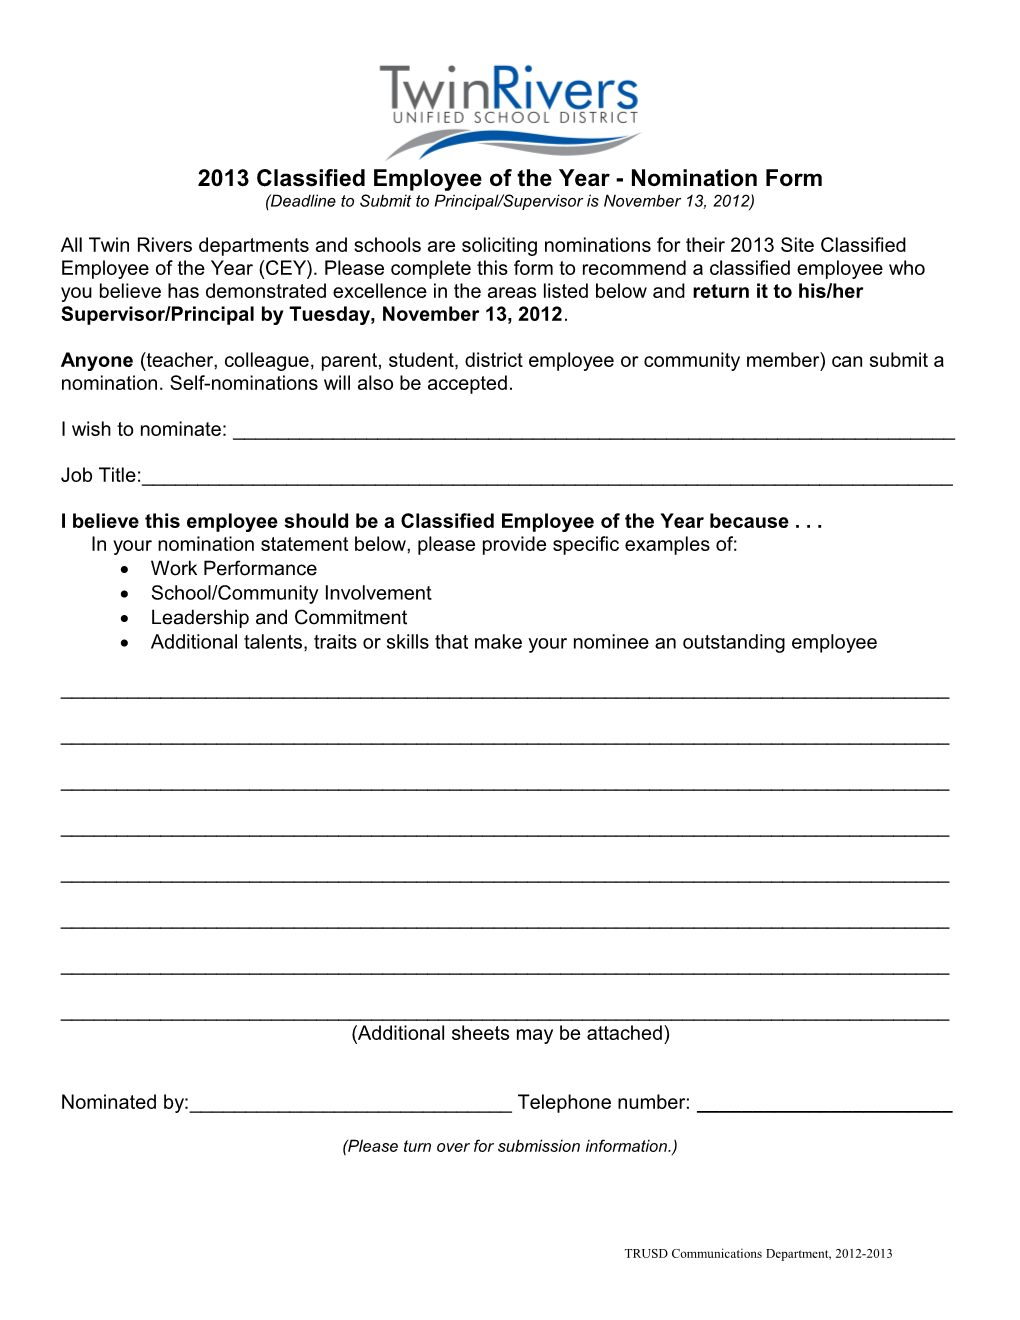 2013 Classified Employee of the Year - Nomination Form